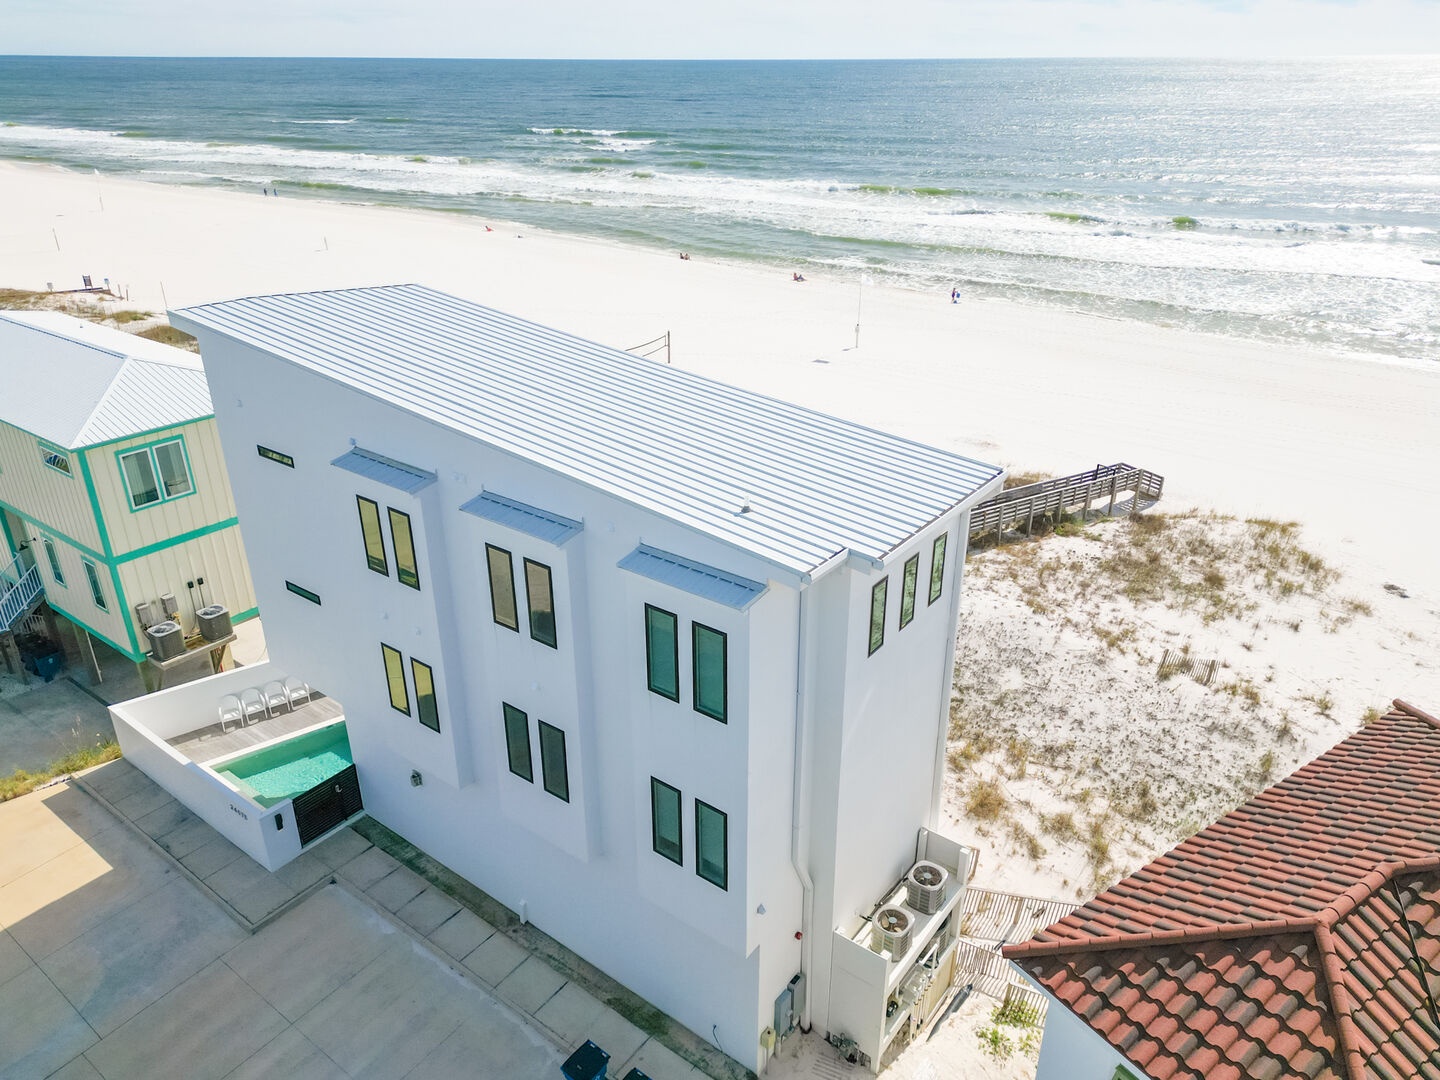 This stunning beach house can comfortably sleep up to 16 people